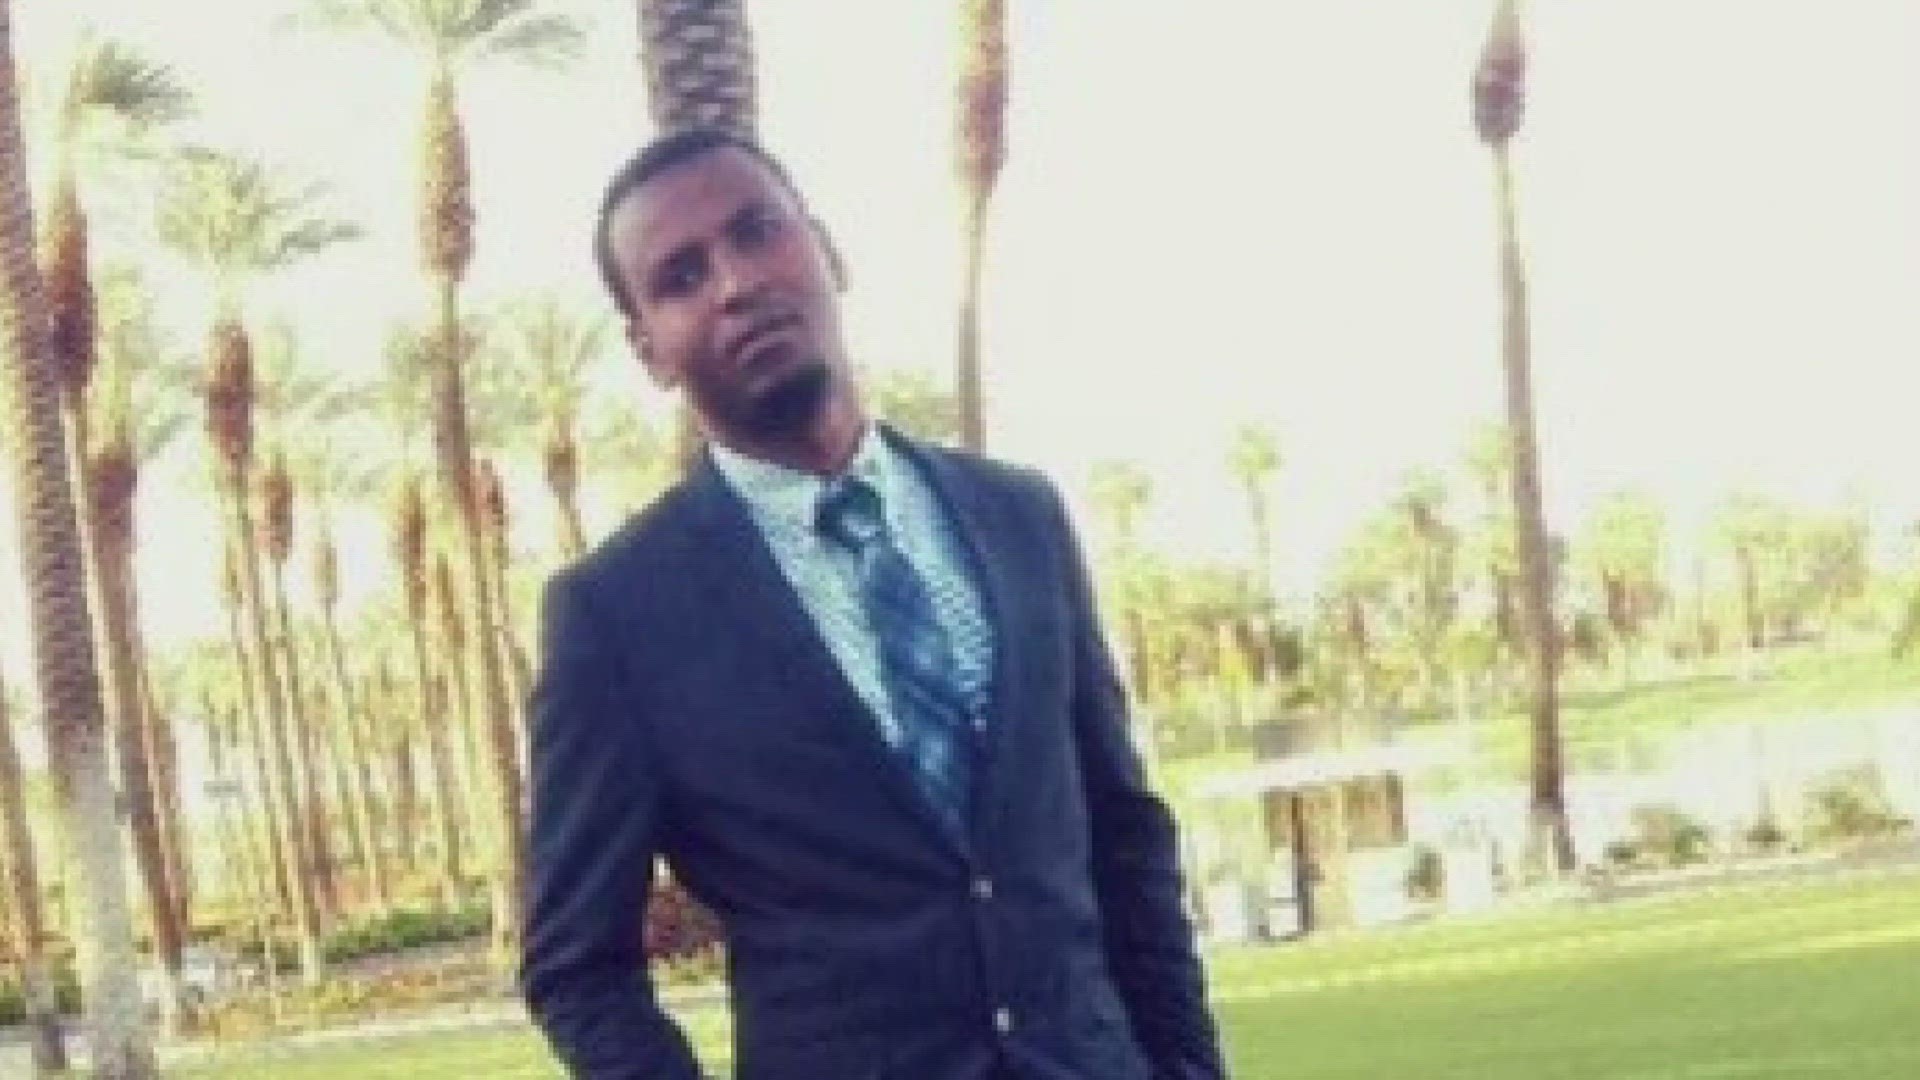 Ali Osman, 34, was shot and killed by Phoenix police after throwing rocks at cars and police officers.